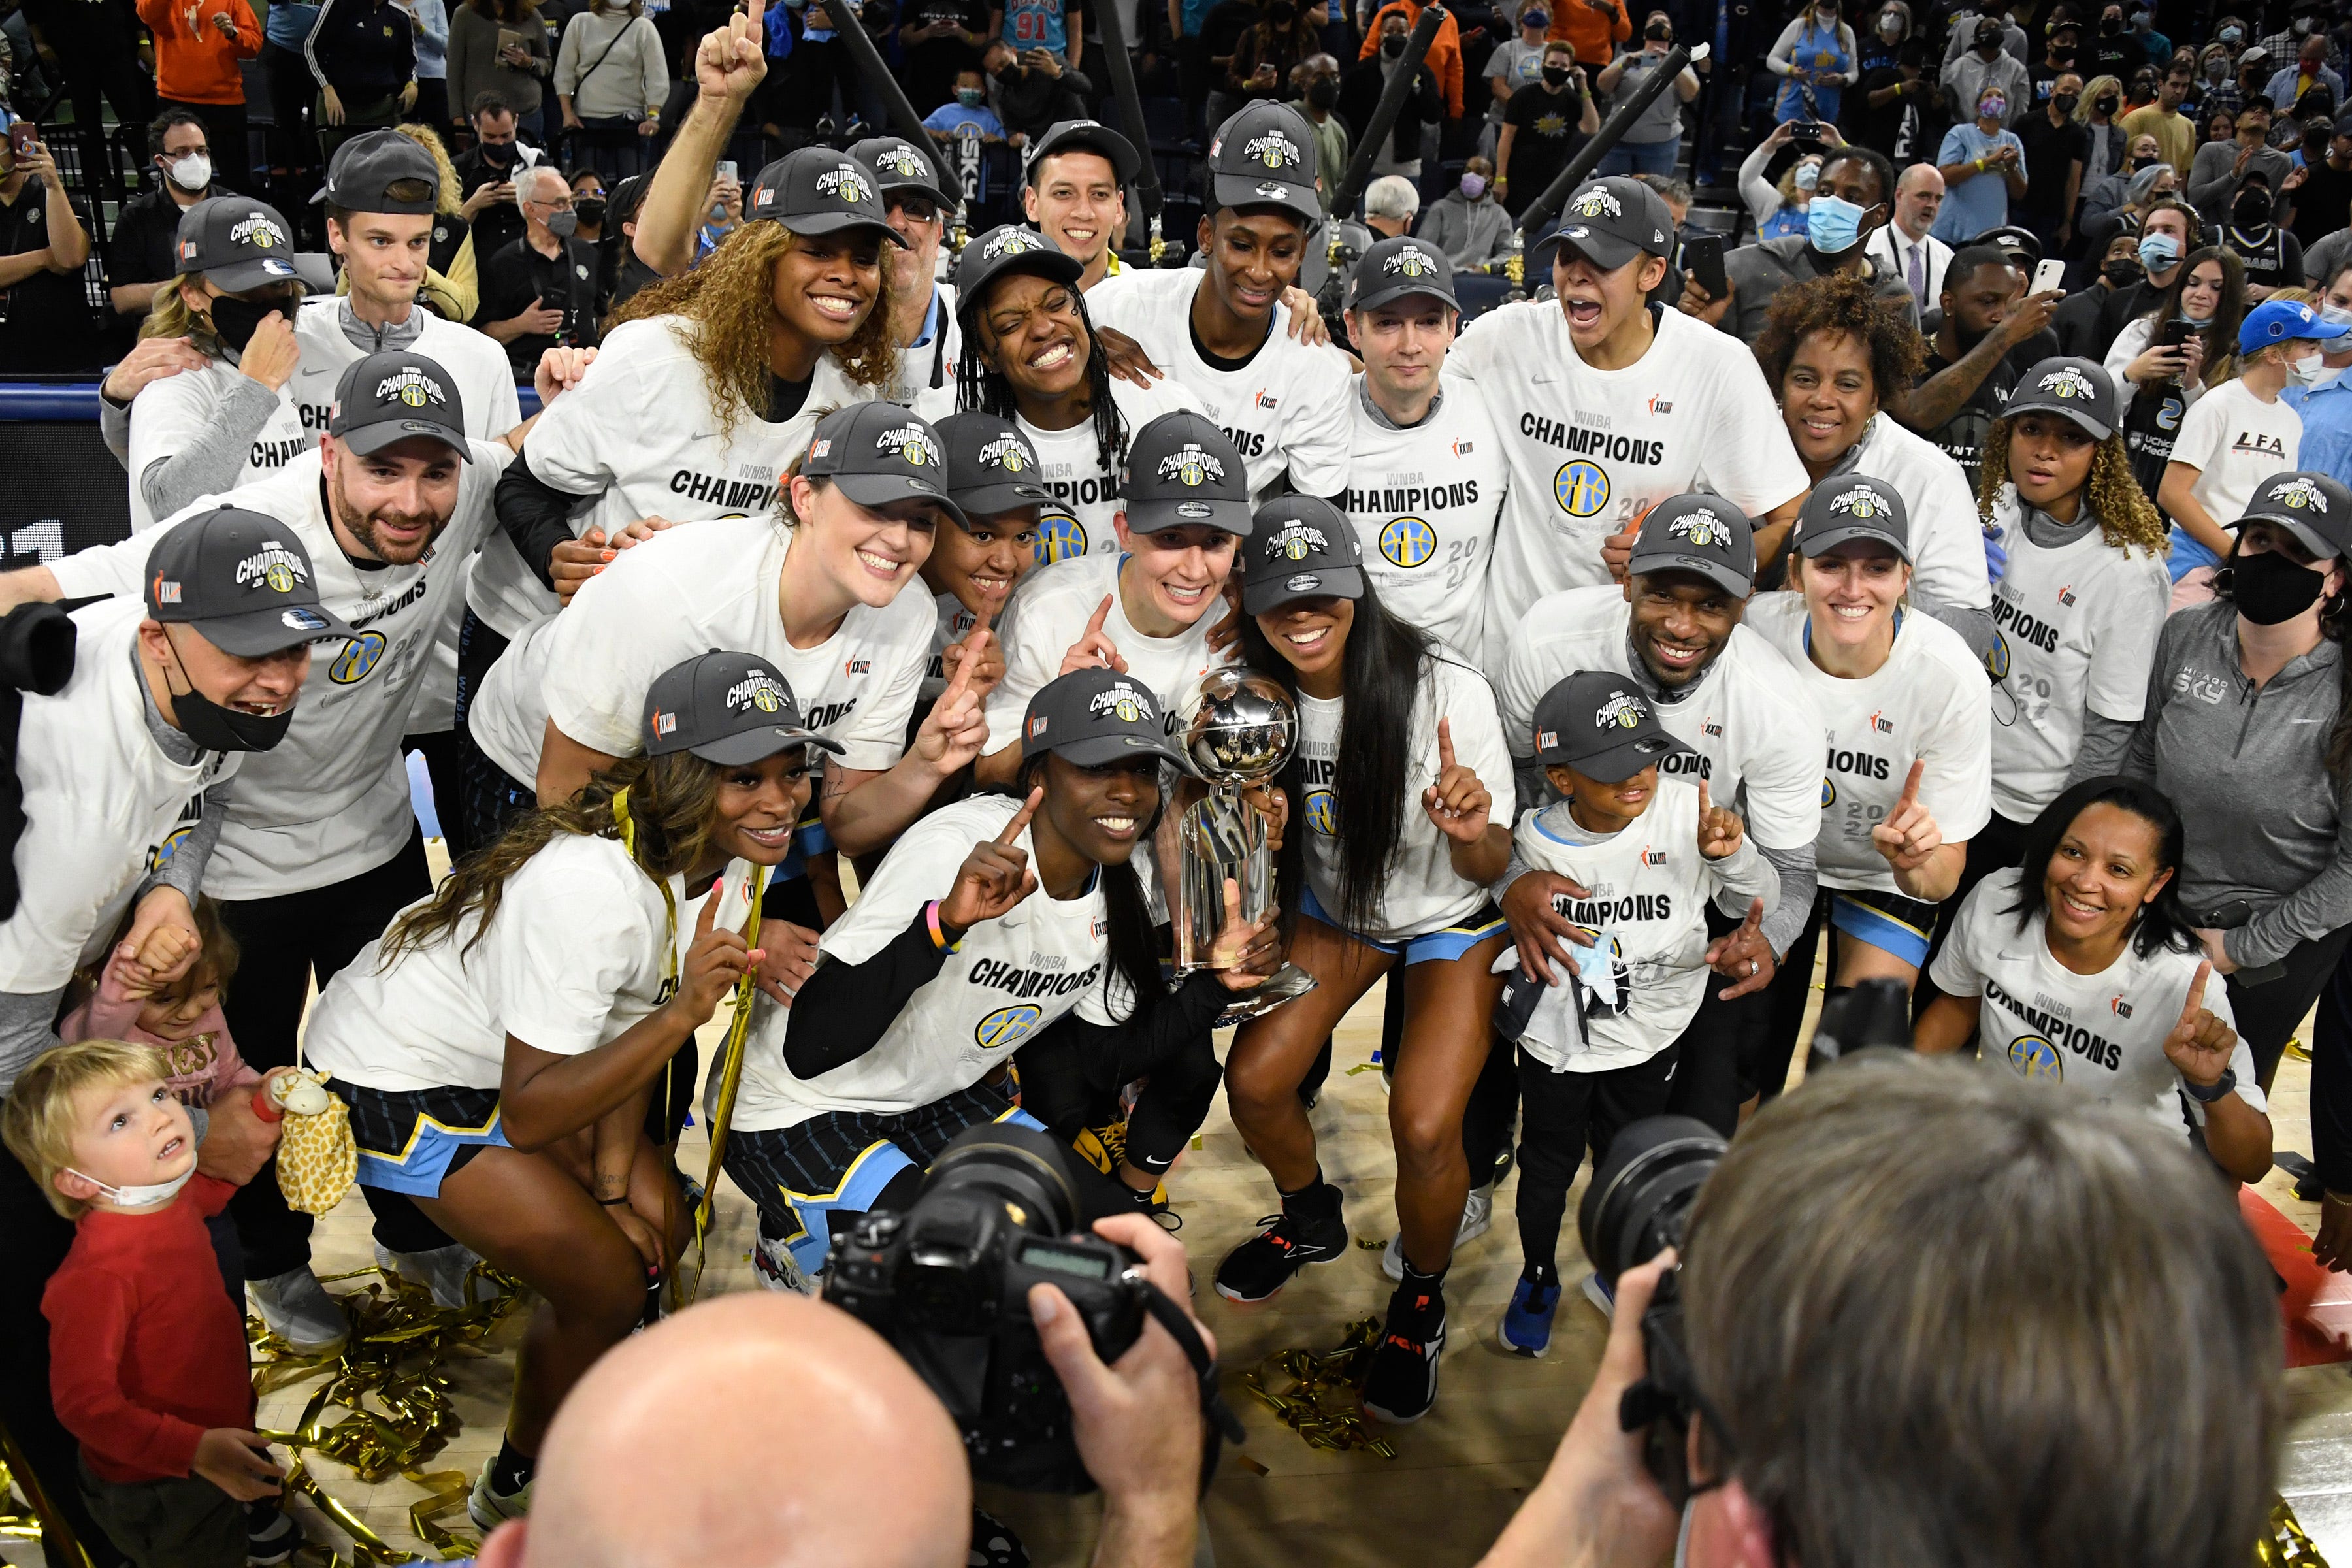 'We two-for-two': The story of Tonya Edwards, the Lady Vol by Candace Parker's side in WNBA titles